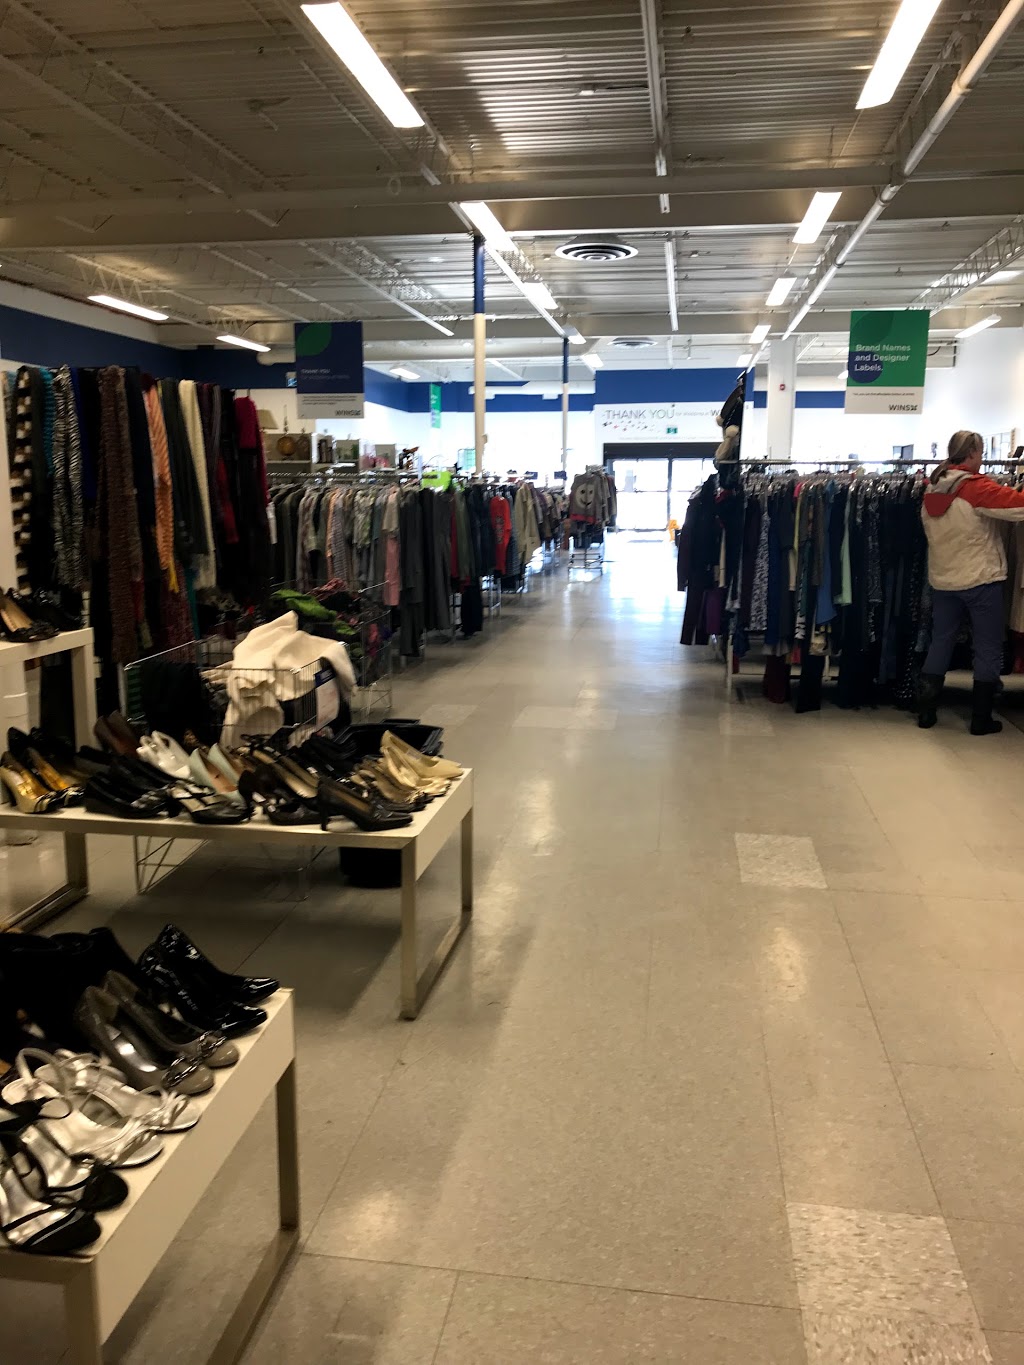 WINS Thrift Store (Women In Need Society) | clothing store | 180 94 Ave SE #32, Calgary, AB T2J 3G8, Canada | 4032512028 OR +1 403-251-2028